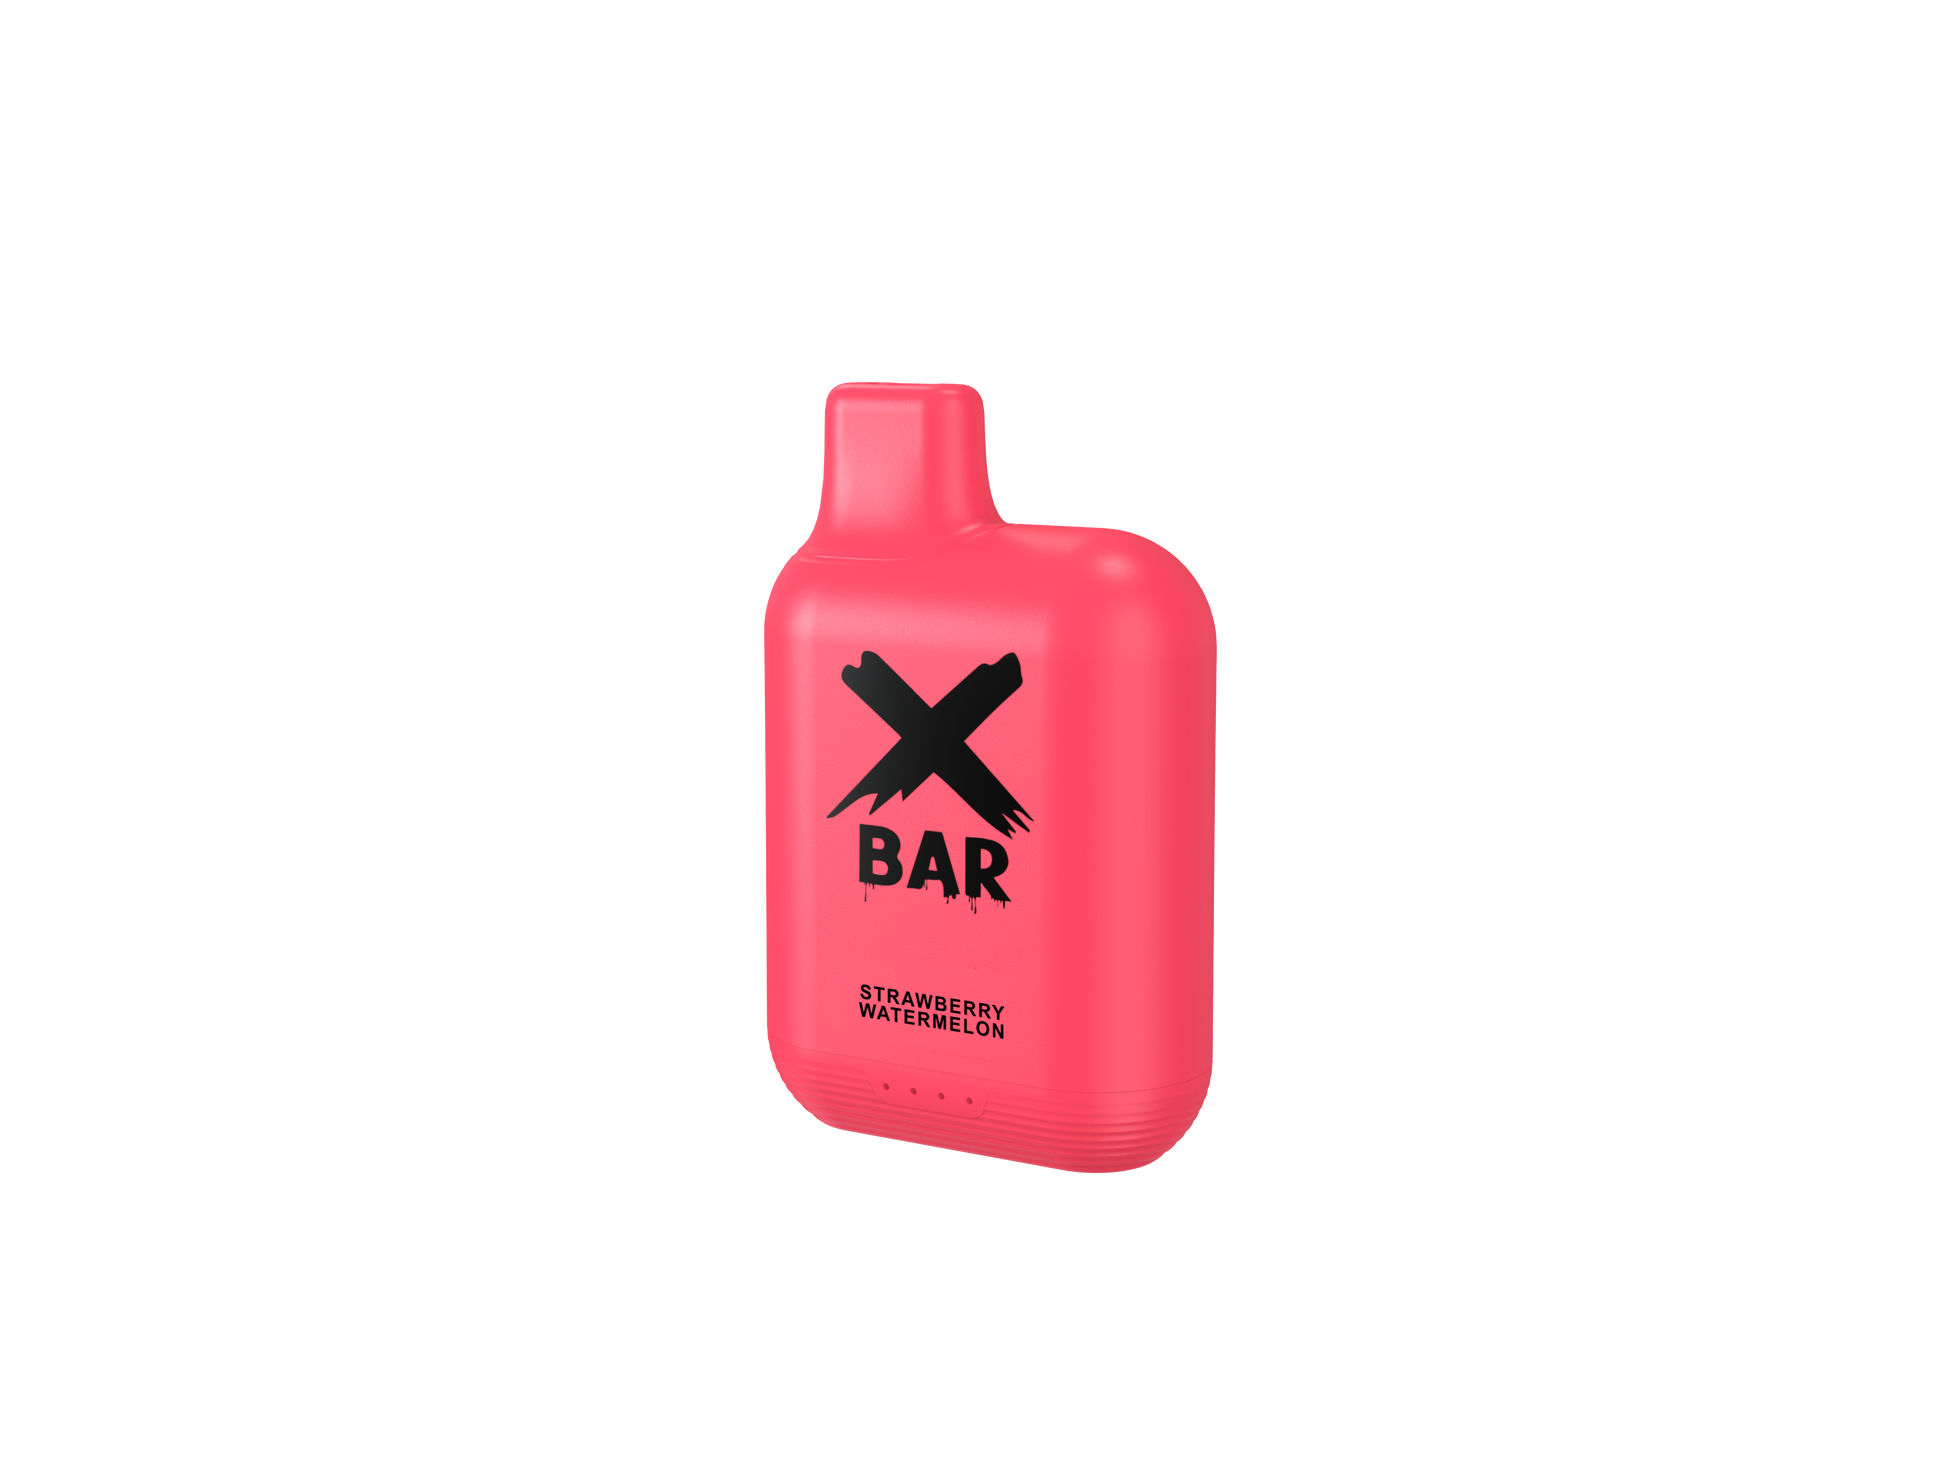 Strawberry Watermelon Flavored with XBar